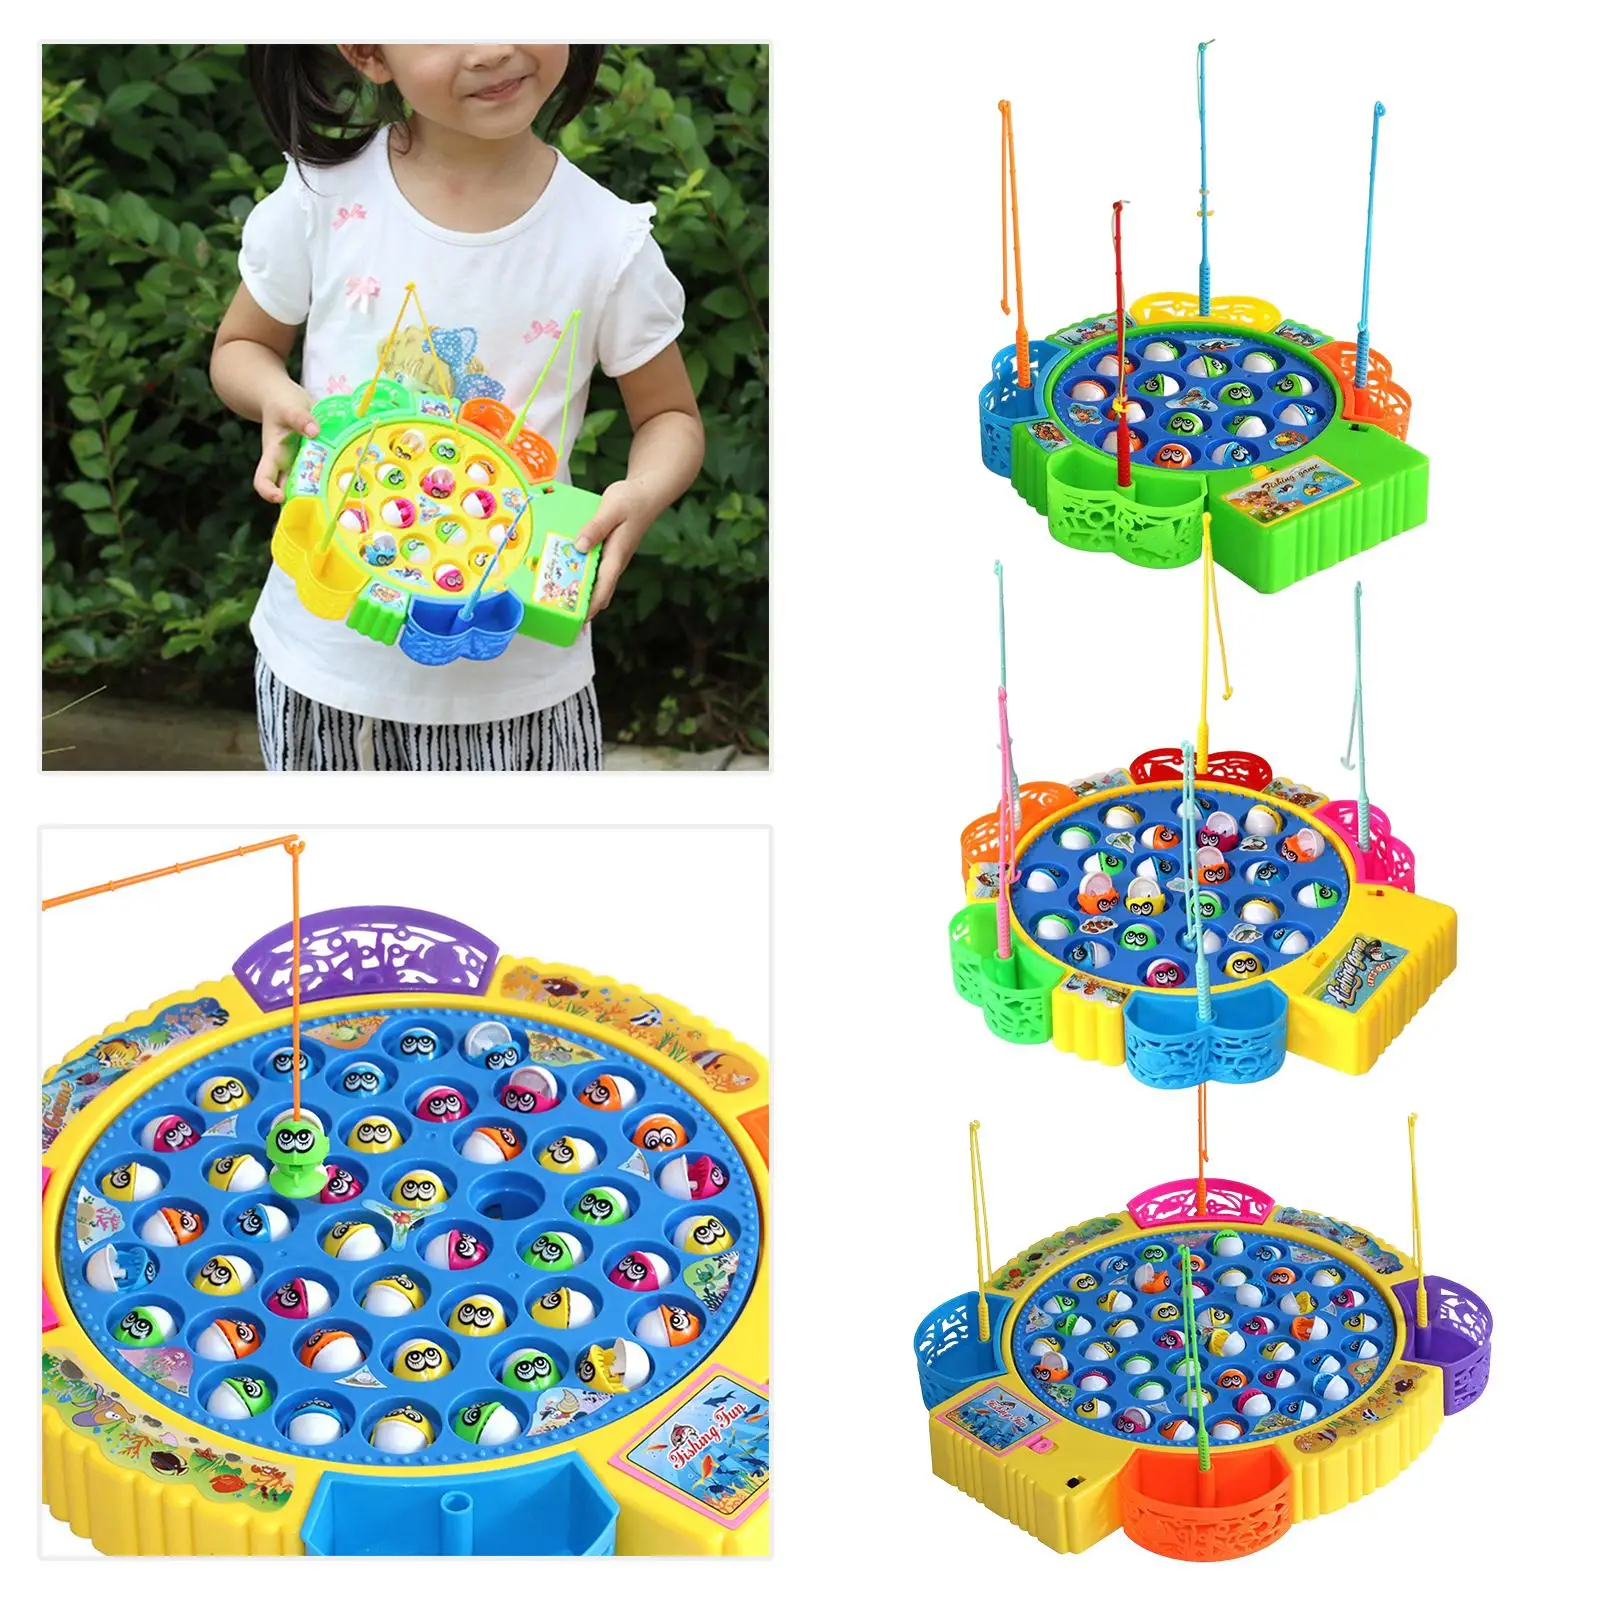 Novelty Rotating Fishing Game Kids toy, kids Fishing Toy Fine Motor skill 3-5 Years Old Educational Toy